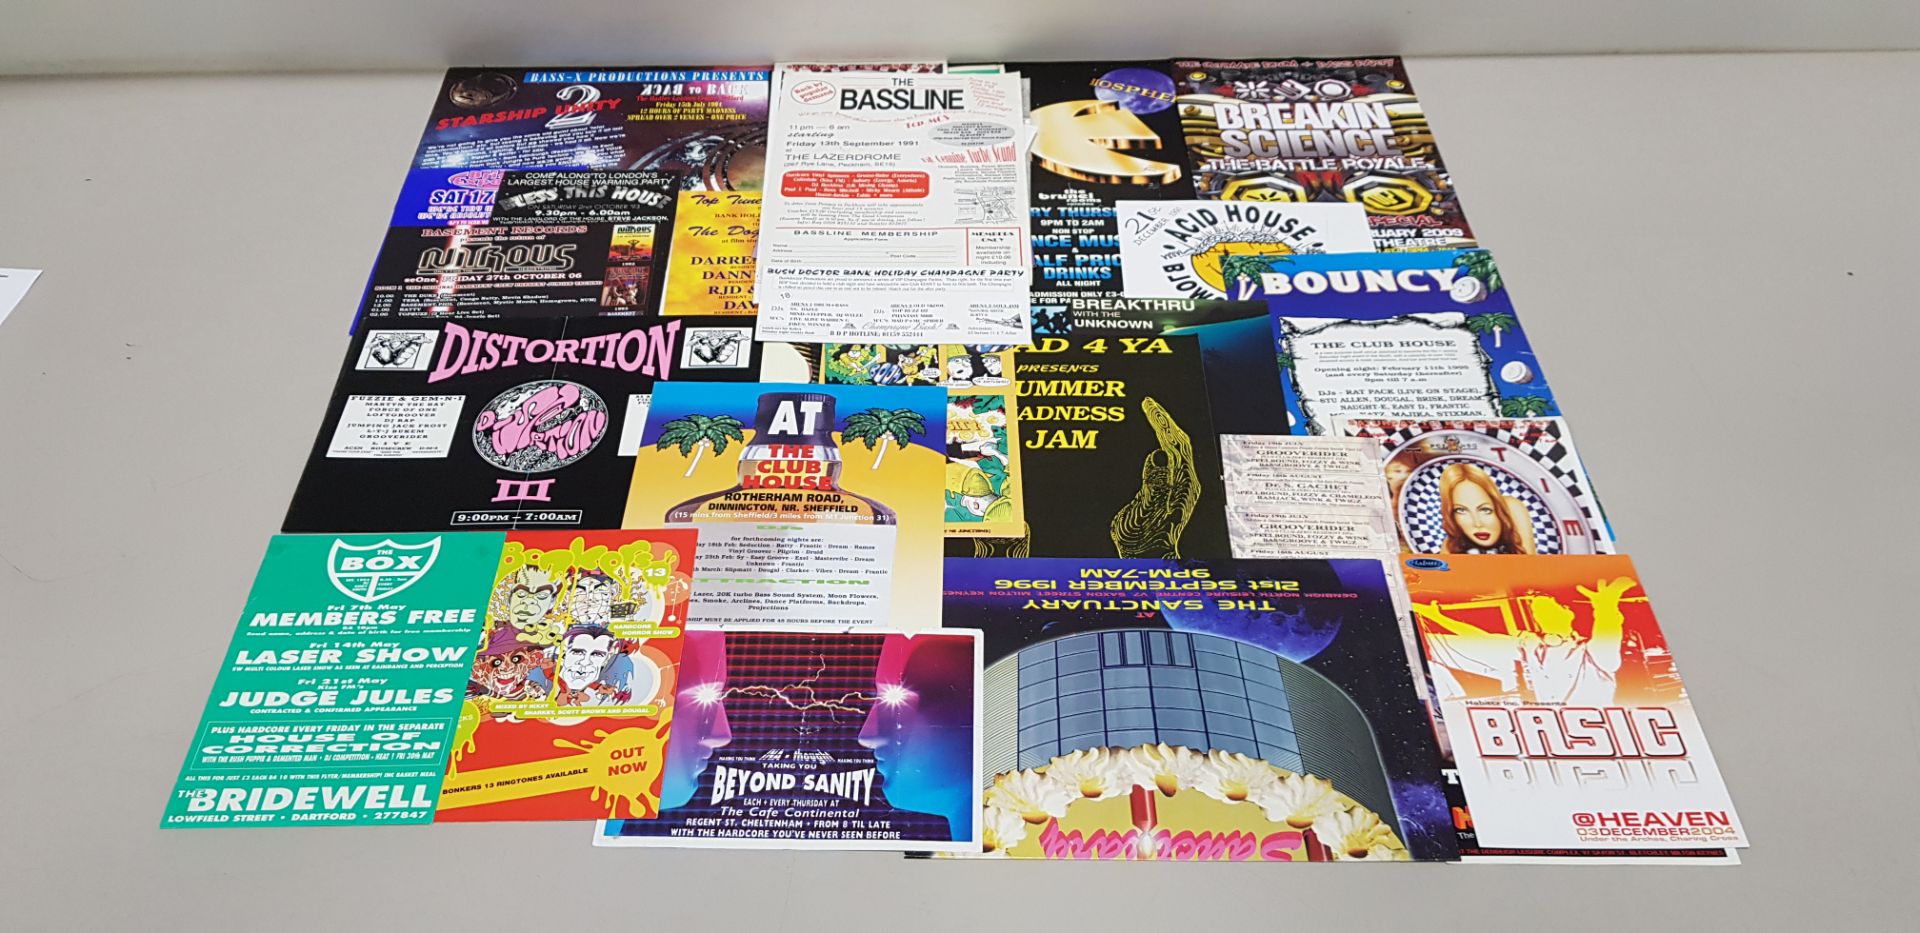 APPROX 63 X VARIOUS RETRO FLYERS AND POSTERS IE DISTORTION 1992, BOUNCY 'THE CLUB HOUSE' 1995, THE